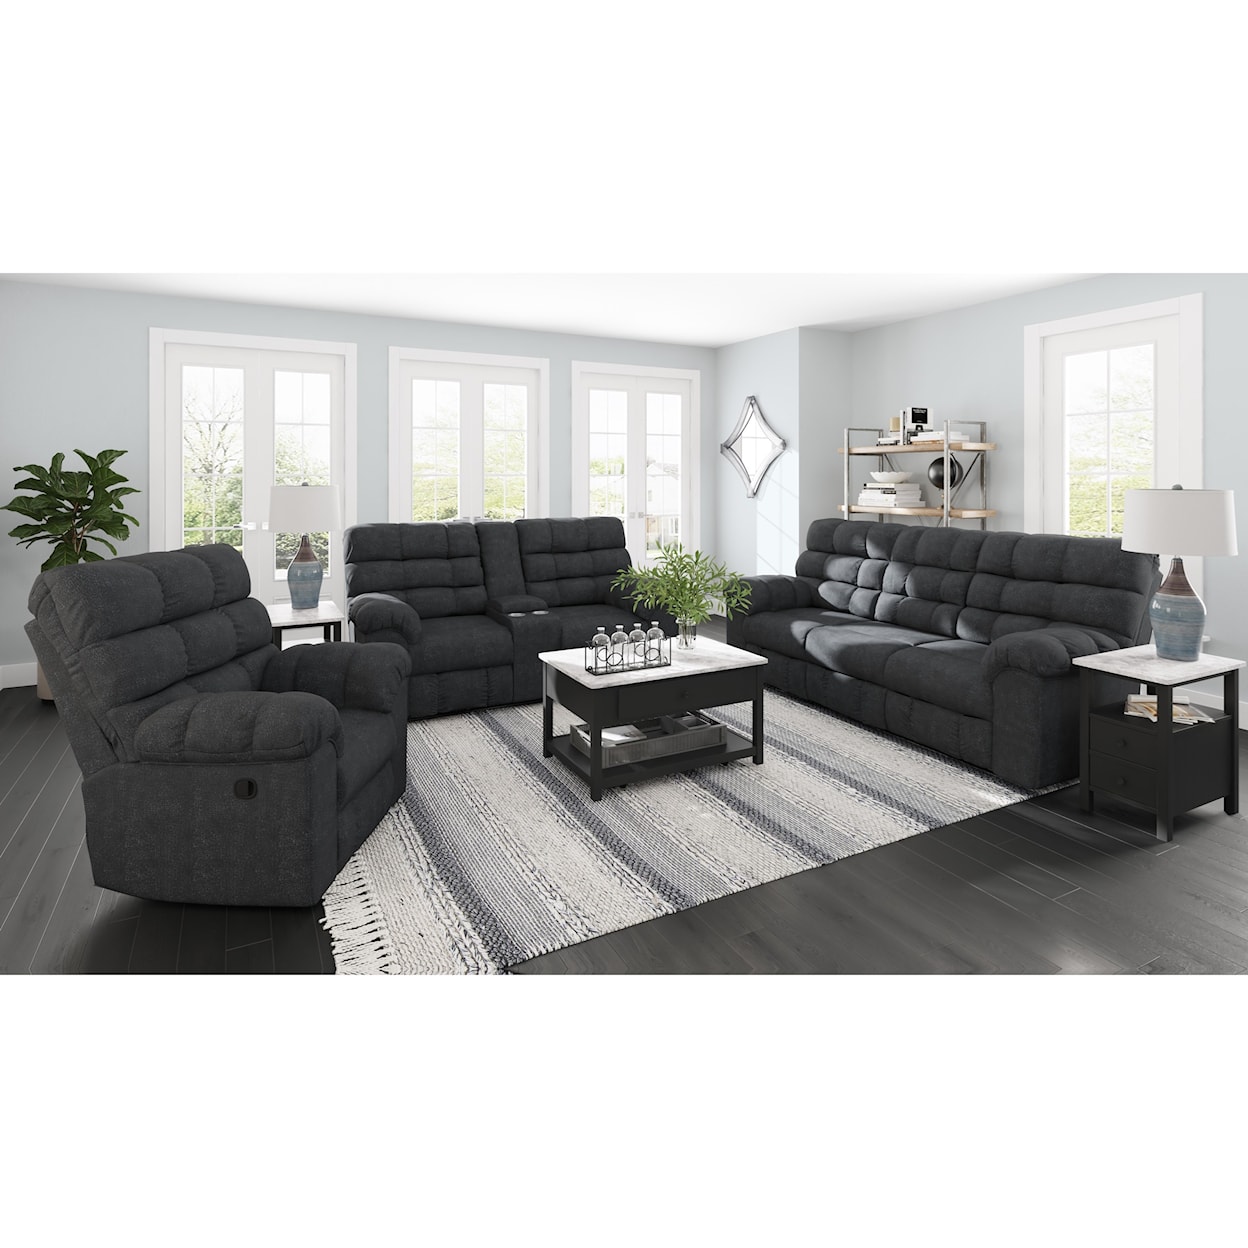 Signature Design by Ashley Wilhurst Reclining Living Room Group